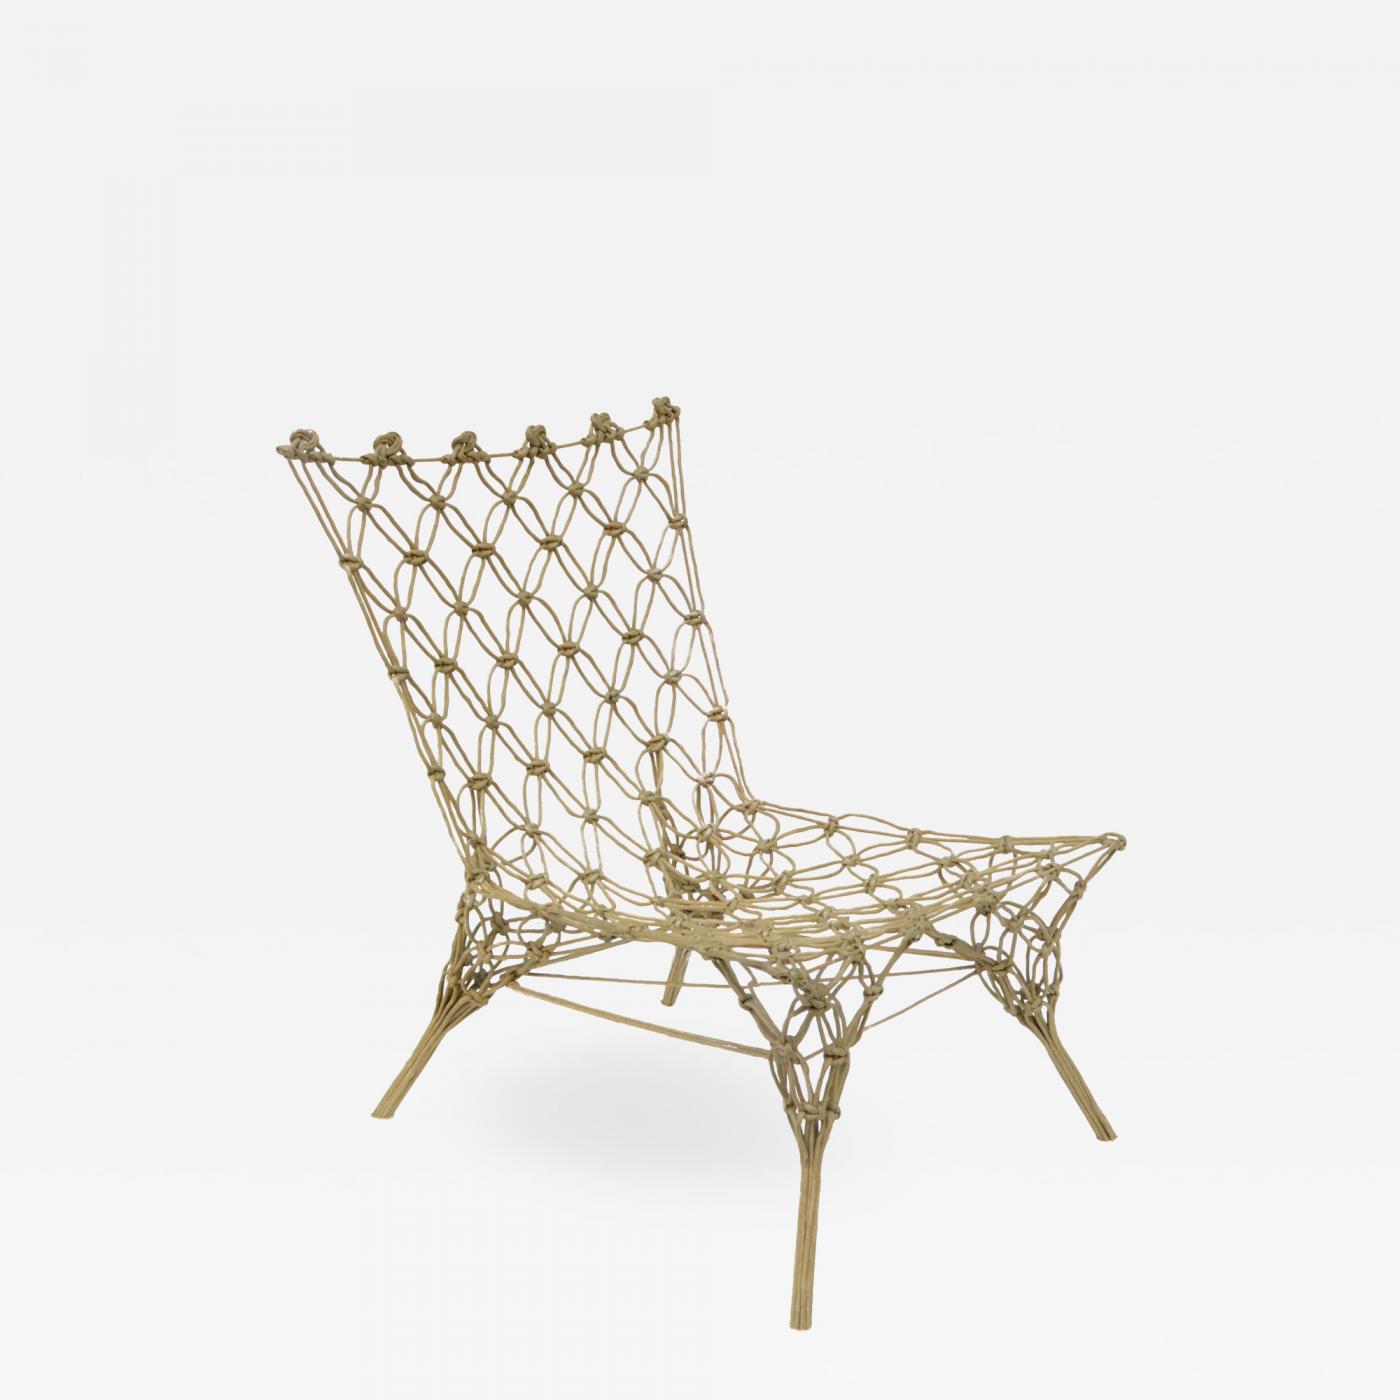 Knotted Chair – Marcel Wanders